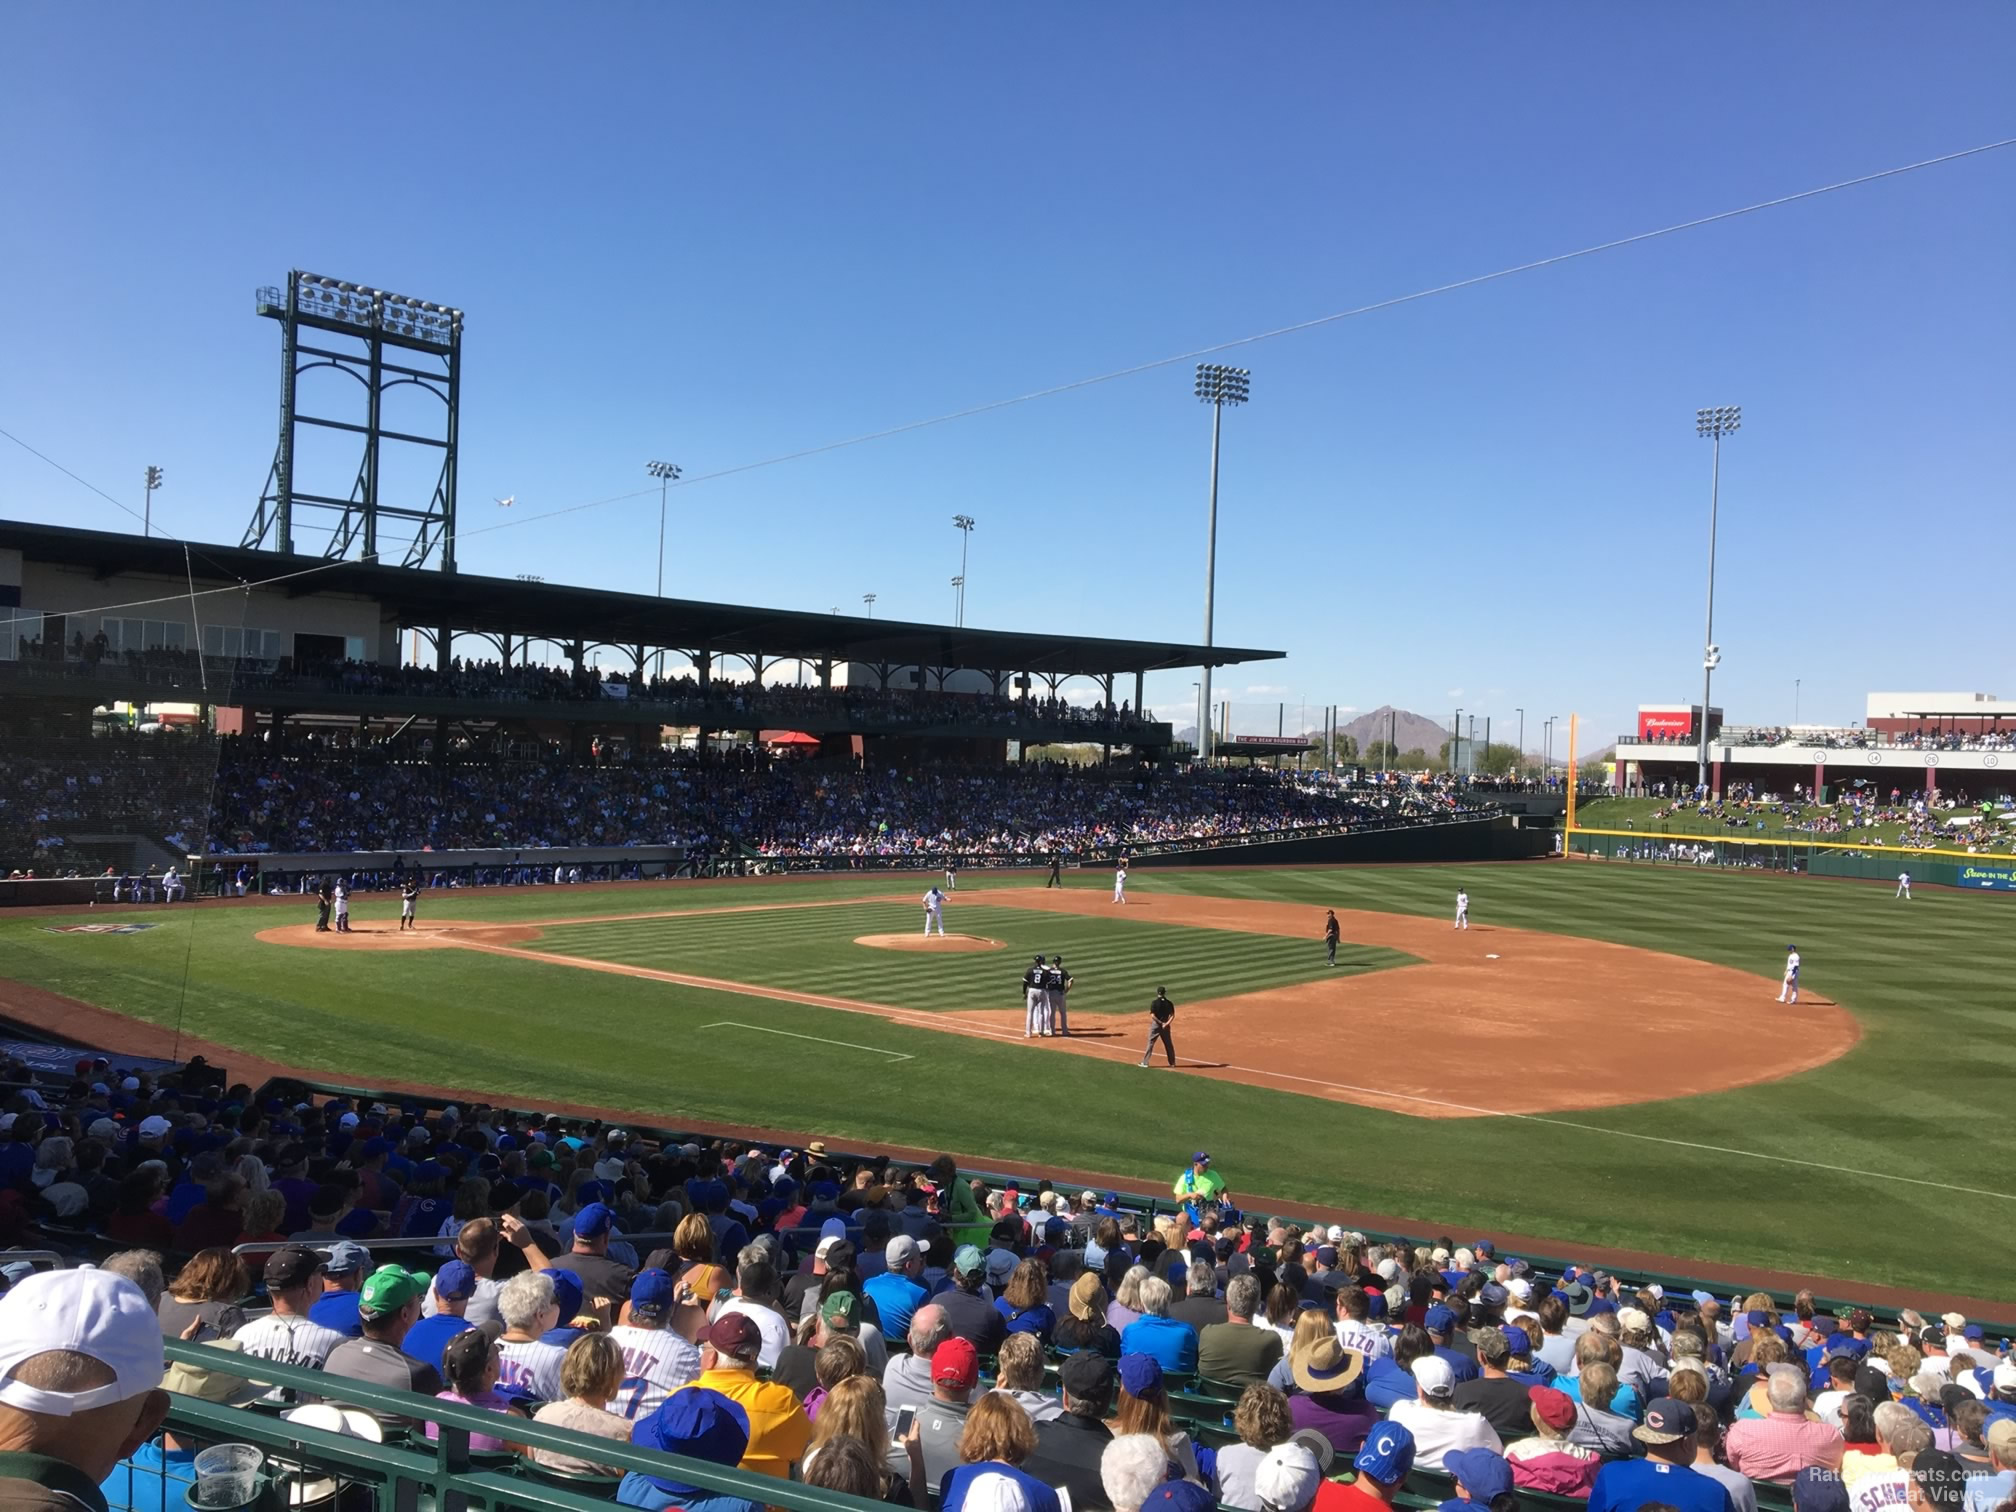 section 118, row 24 seat view  - sloan park